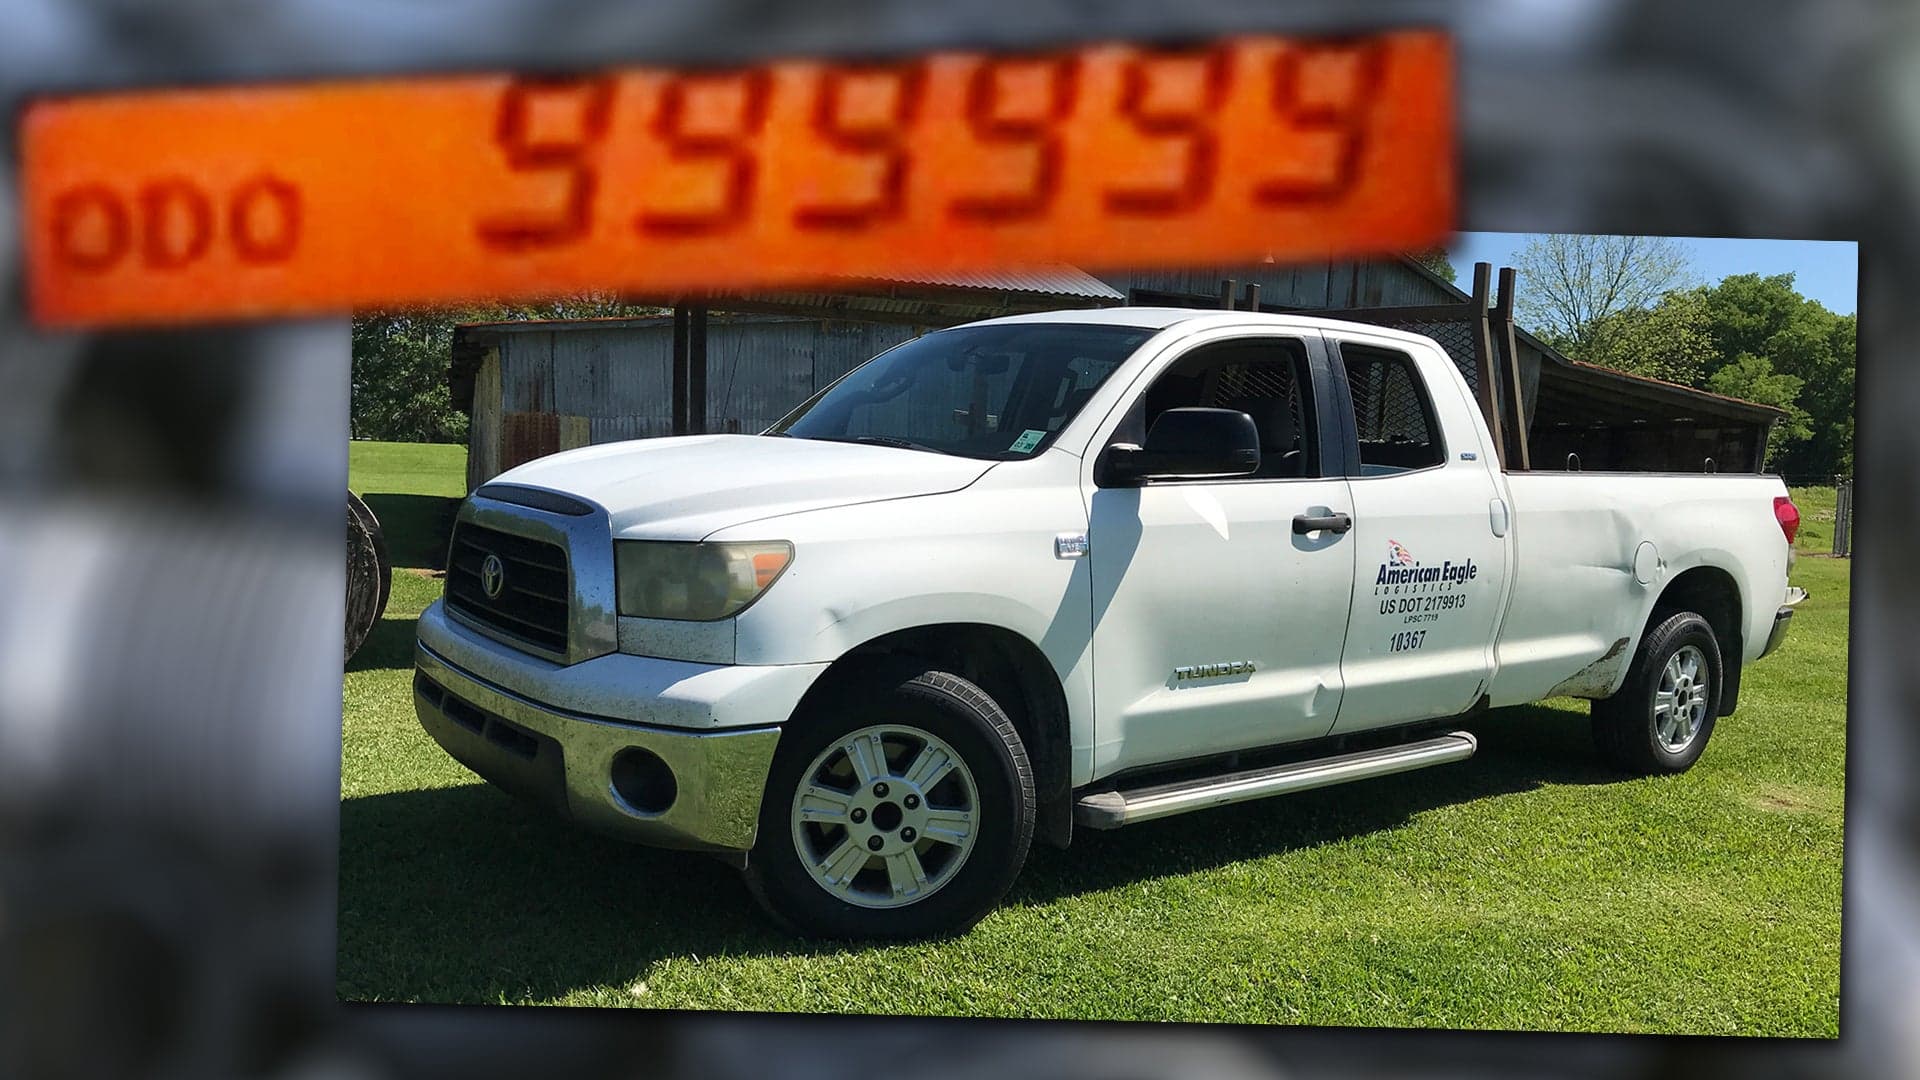 Second Toyota Tundra Pickup Hits a Million Miles, Serviced at Same Dealer as the First